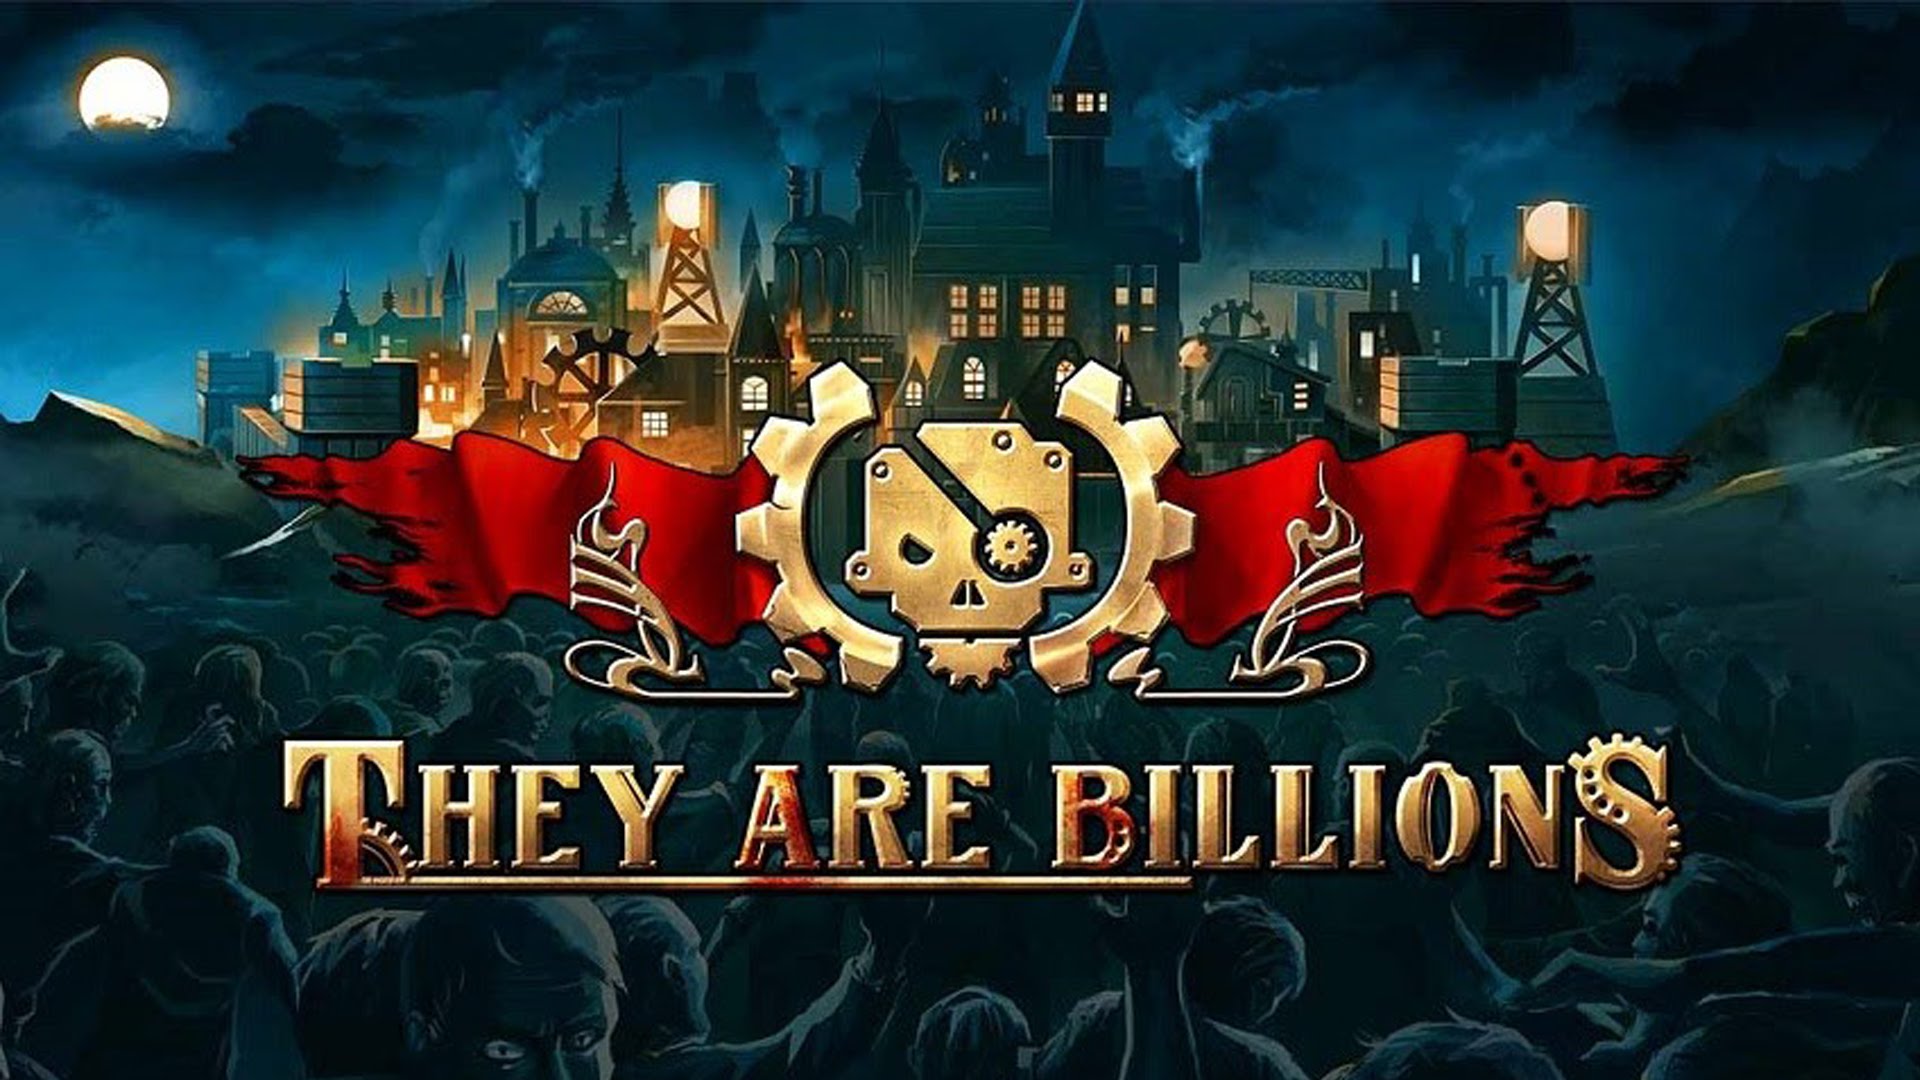 Analisis de They Are Billions